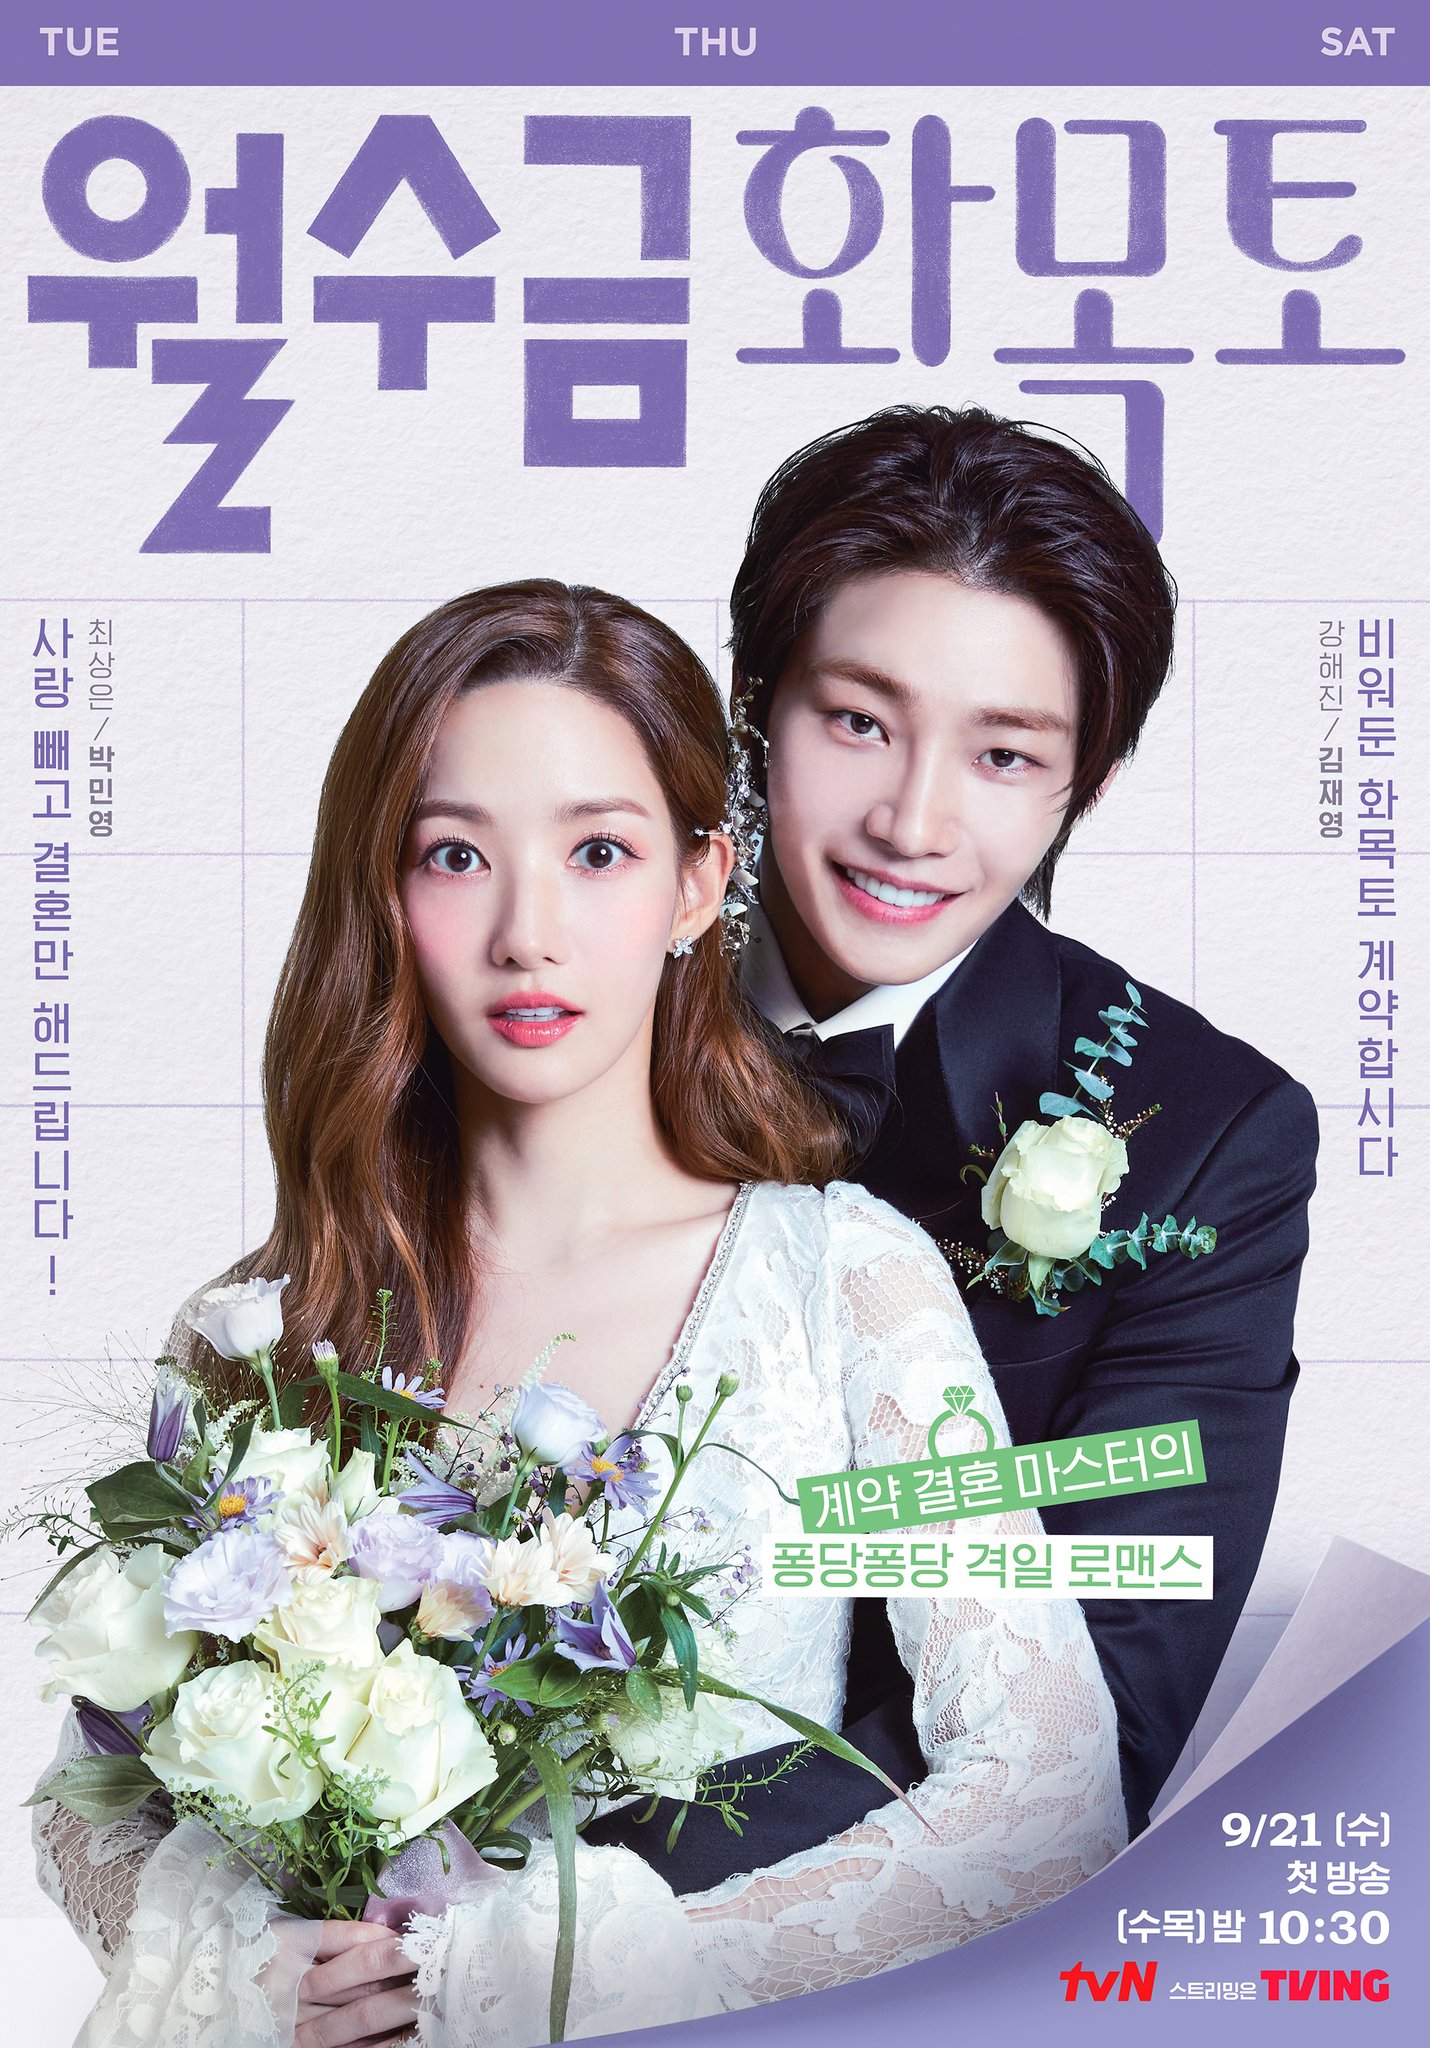 It's a groom face-off in new posters for tvN's Love in Contract